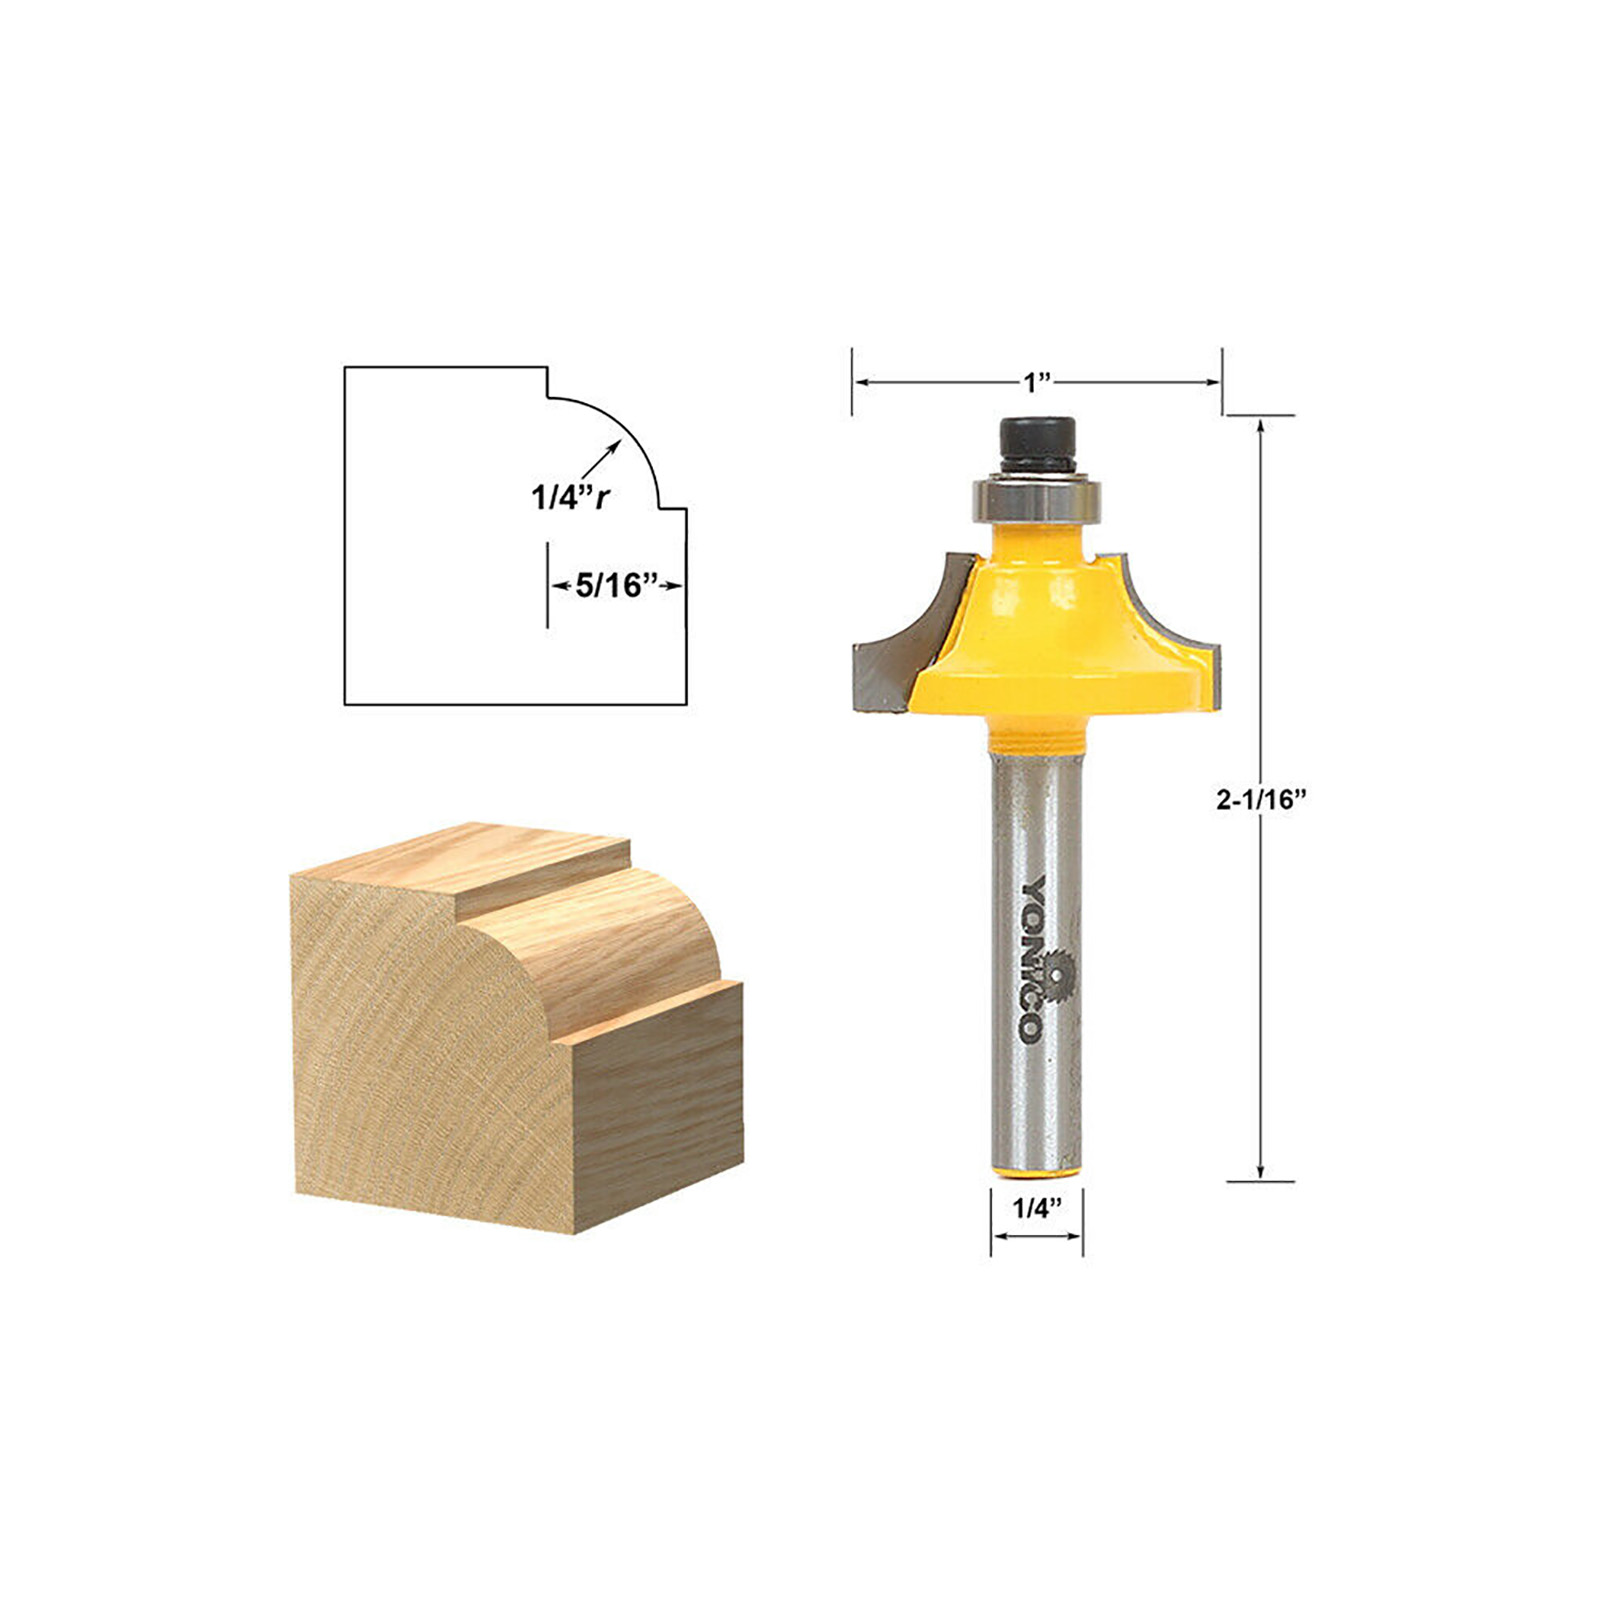 Yonico 1/2" Shank Round Over Edging Router Bit